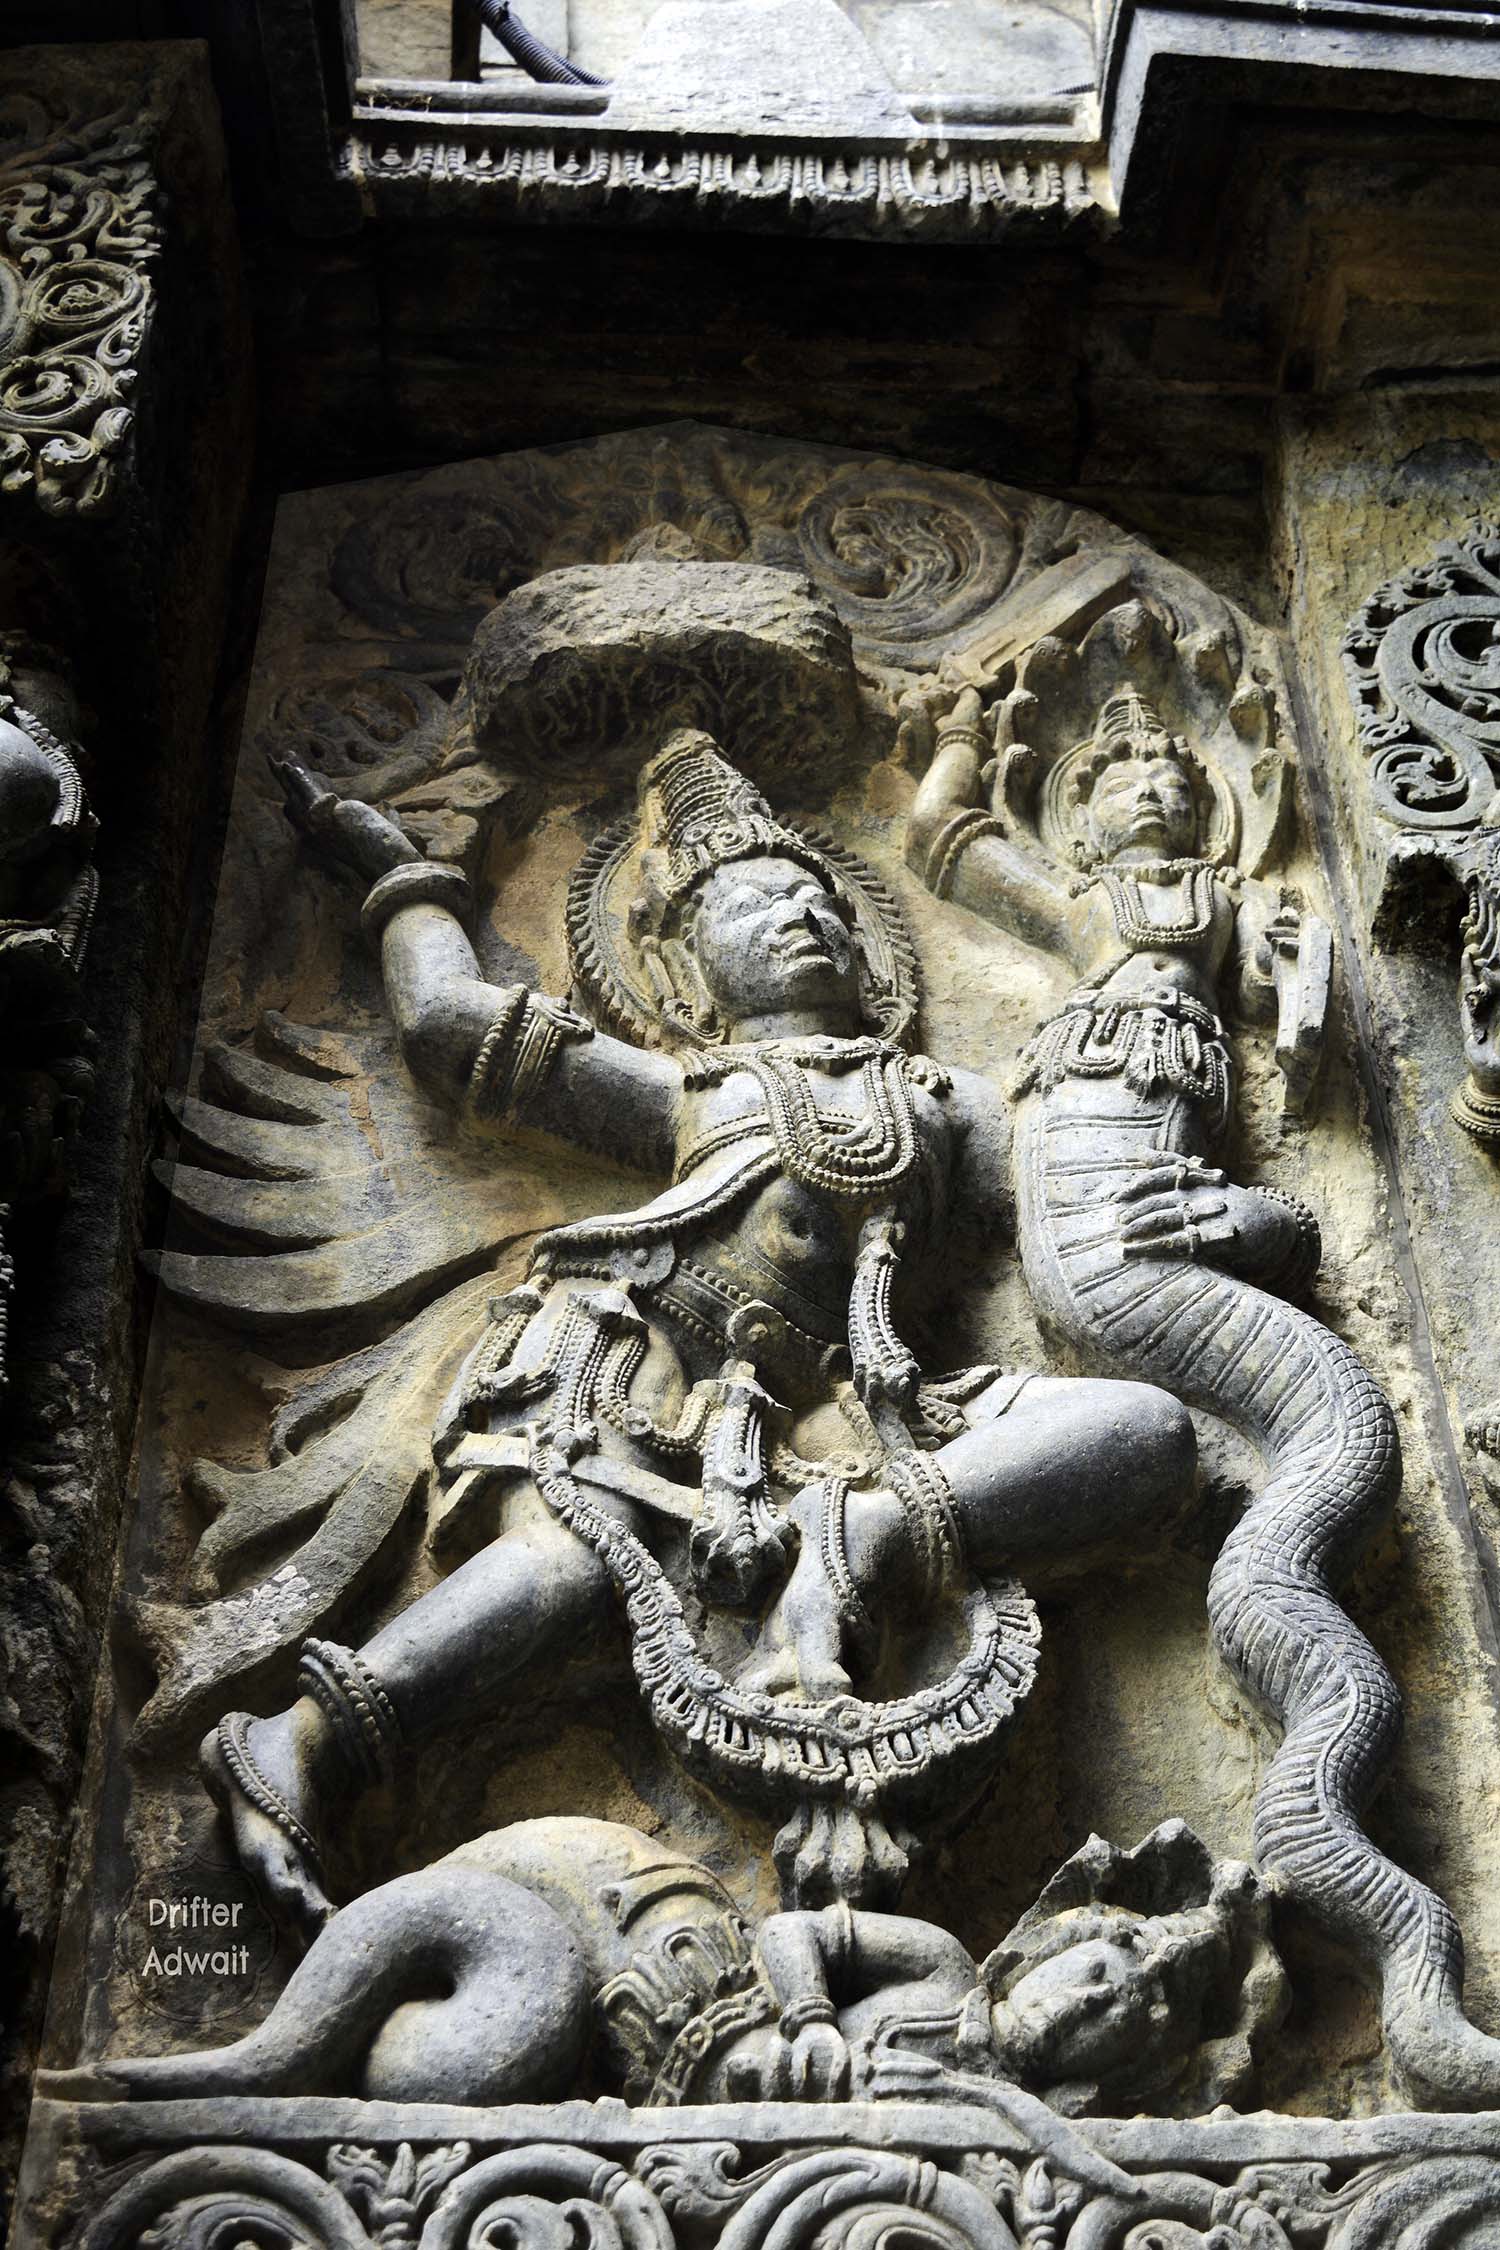 The Mighty Garuda: From Scriptures to Sculpture